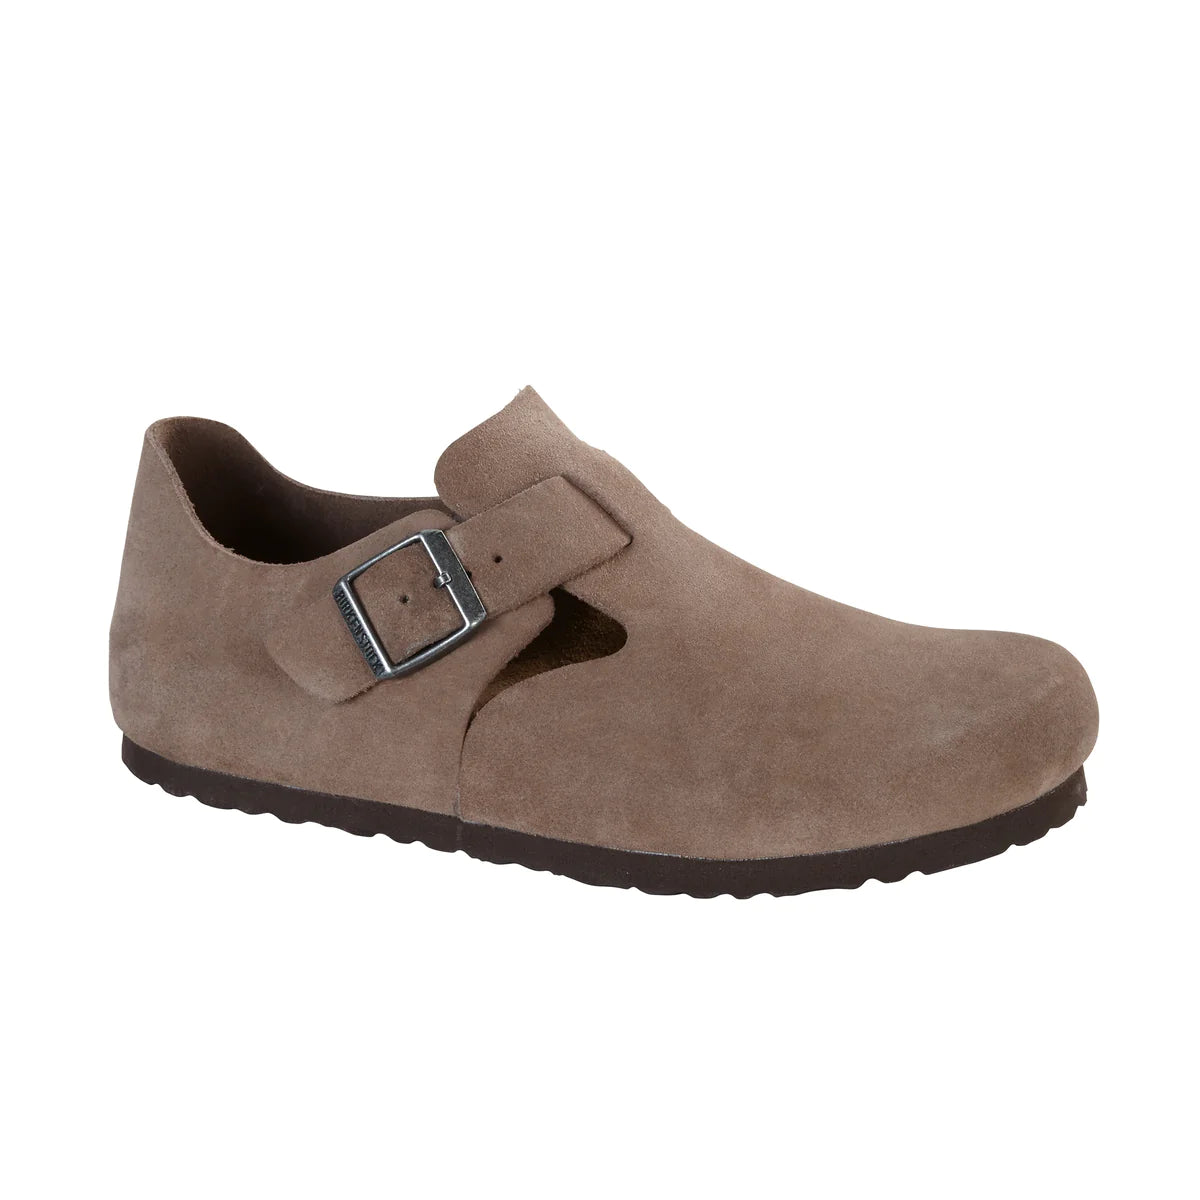 London Taupe Suede Leather Regular